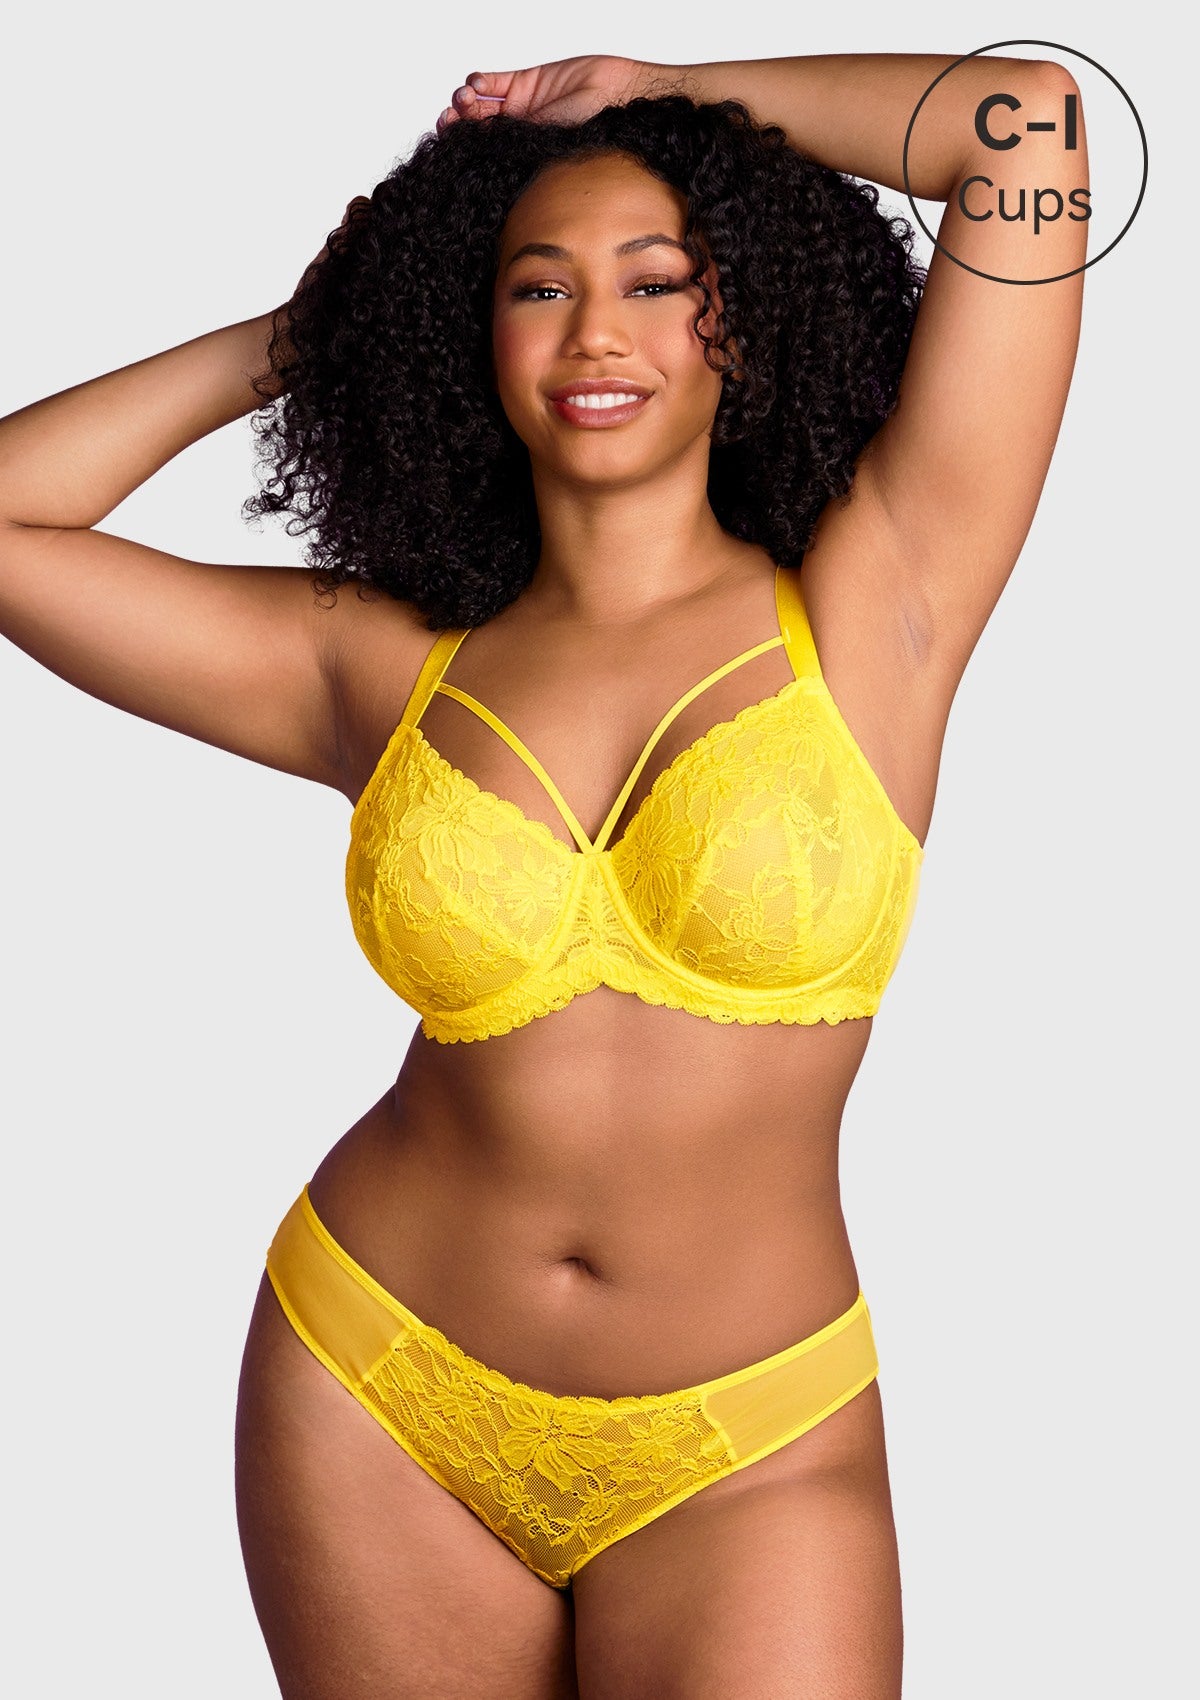 HSIA Unlined Lace Mesh Minimizer Bra For Large Breasts, Full Coverage - Bright Yellow / 40 / C